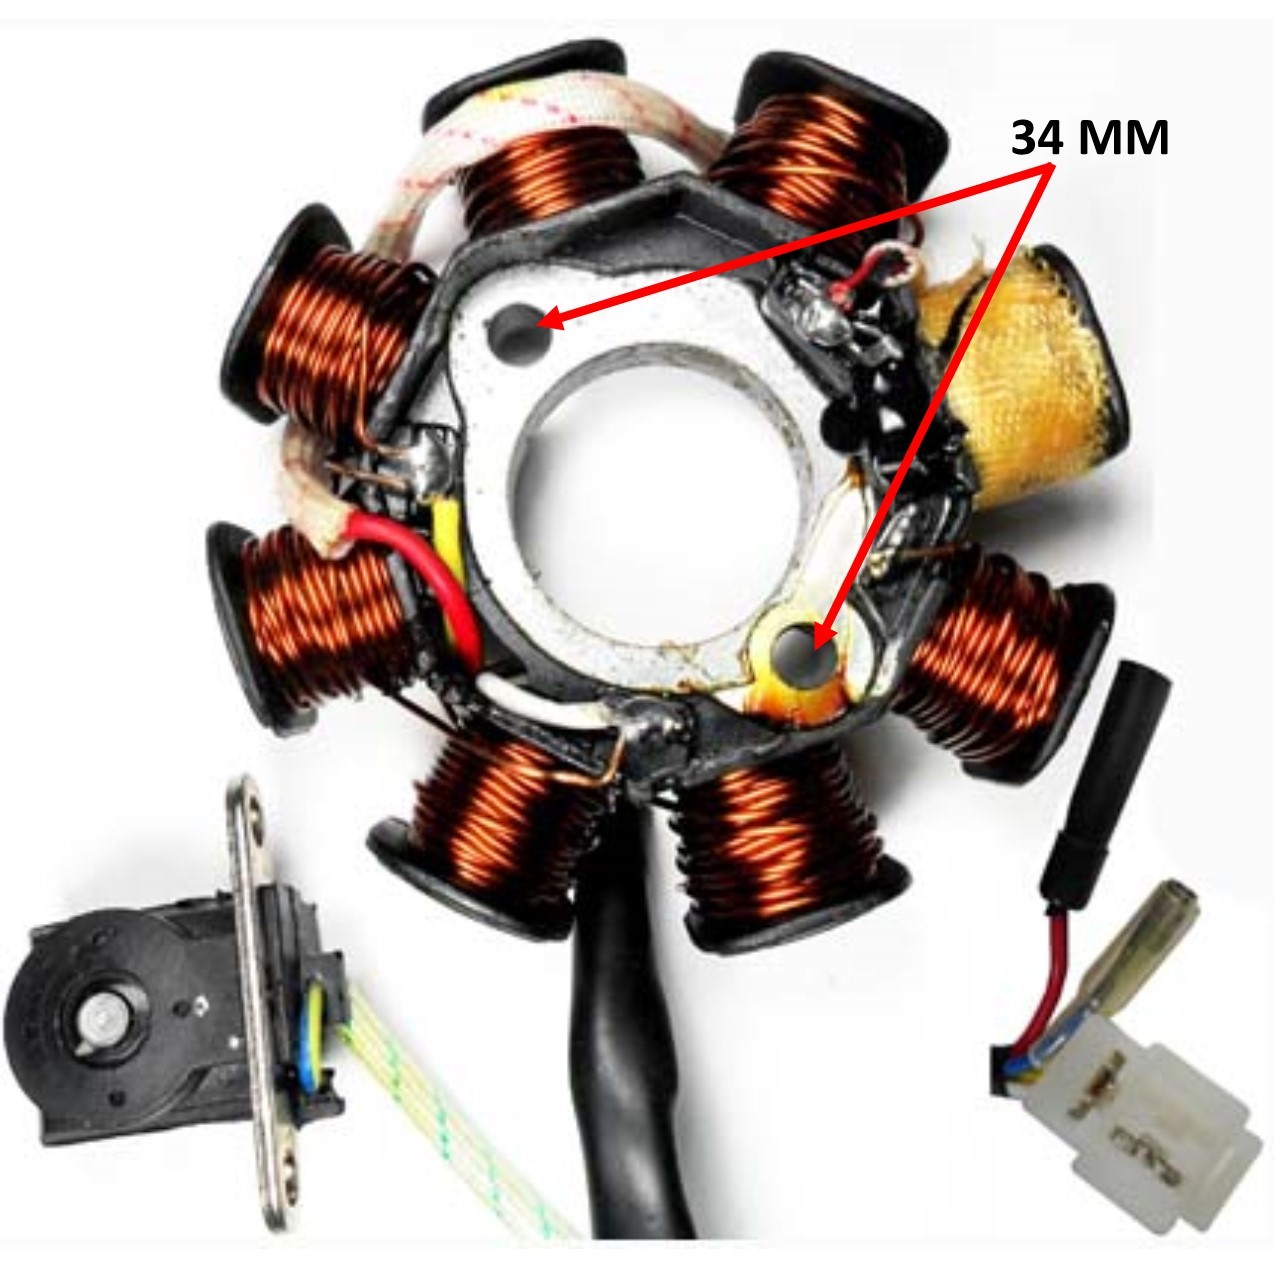 Stator 49-150cc 4 Stroke Fits Many Chinese ATV, GoKarts, Scooters 8 Coil 2 Pin in 3 Pin Jack + 2 Wires 1 Pole Wrapped Pickup Coil c/c=41